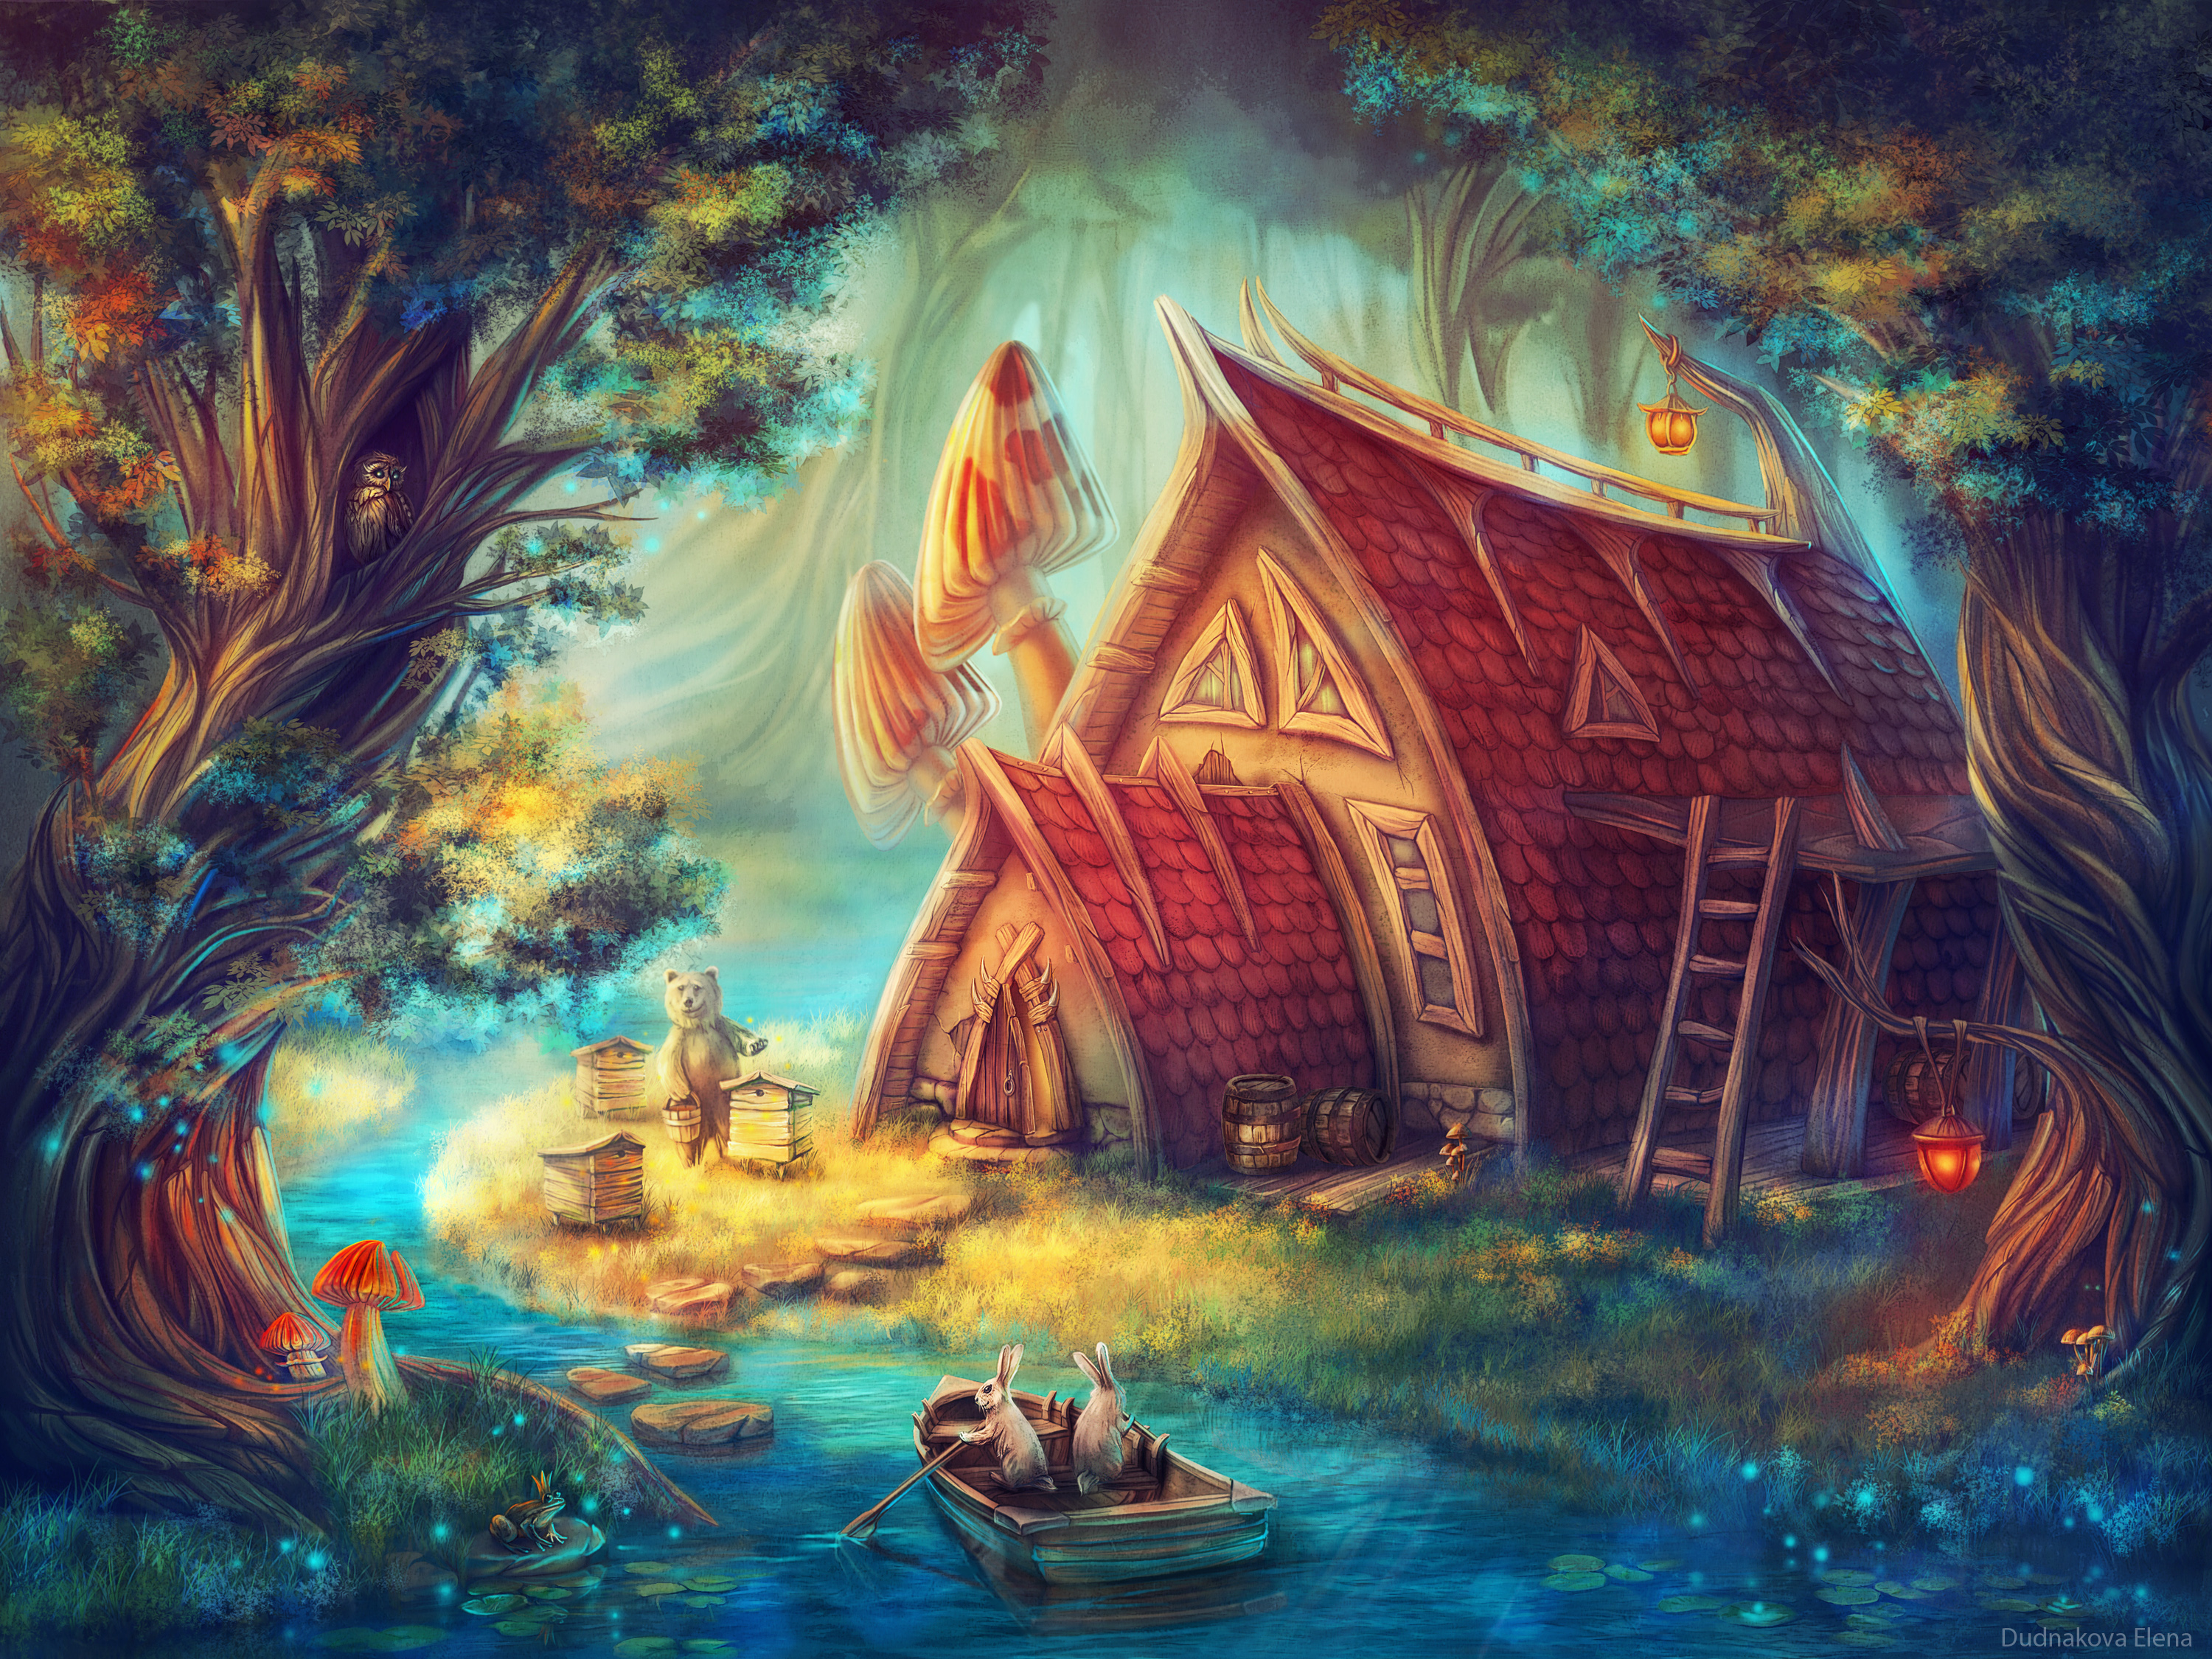 Fantasy Fairy Tale Wallpapers